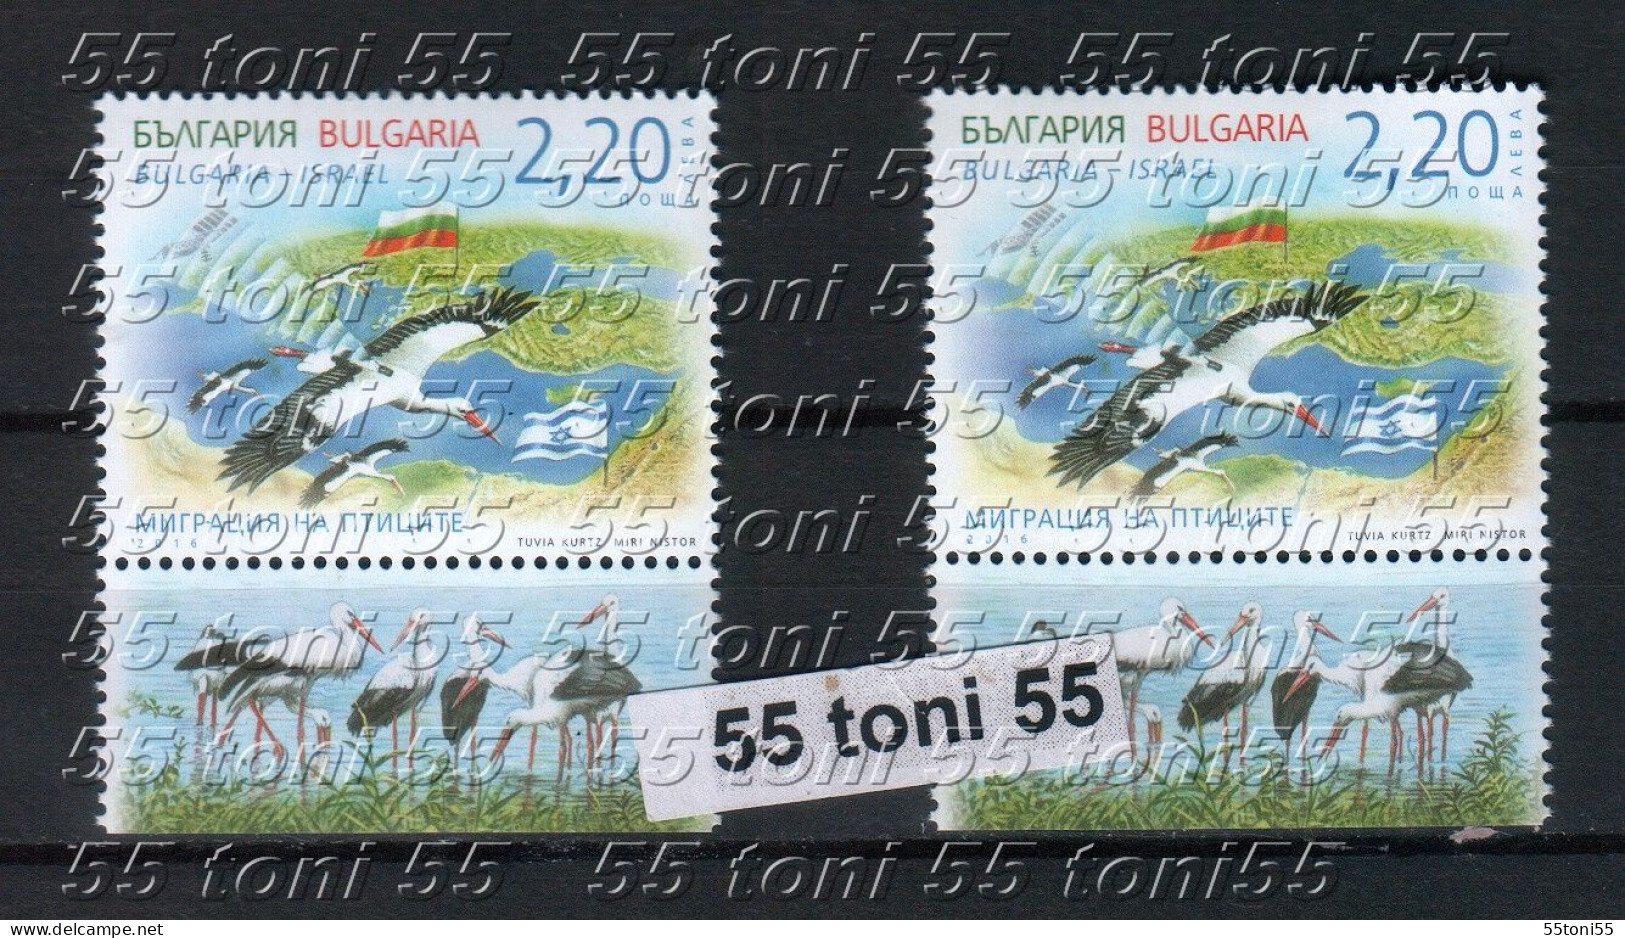 2016 FAUNA / Birds - WHITE STORK ( With Israel) + Vignette UV Threads Paper+normal Paper-MNH - Unused Stamps